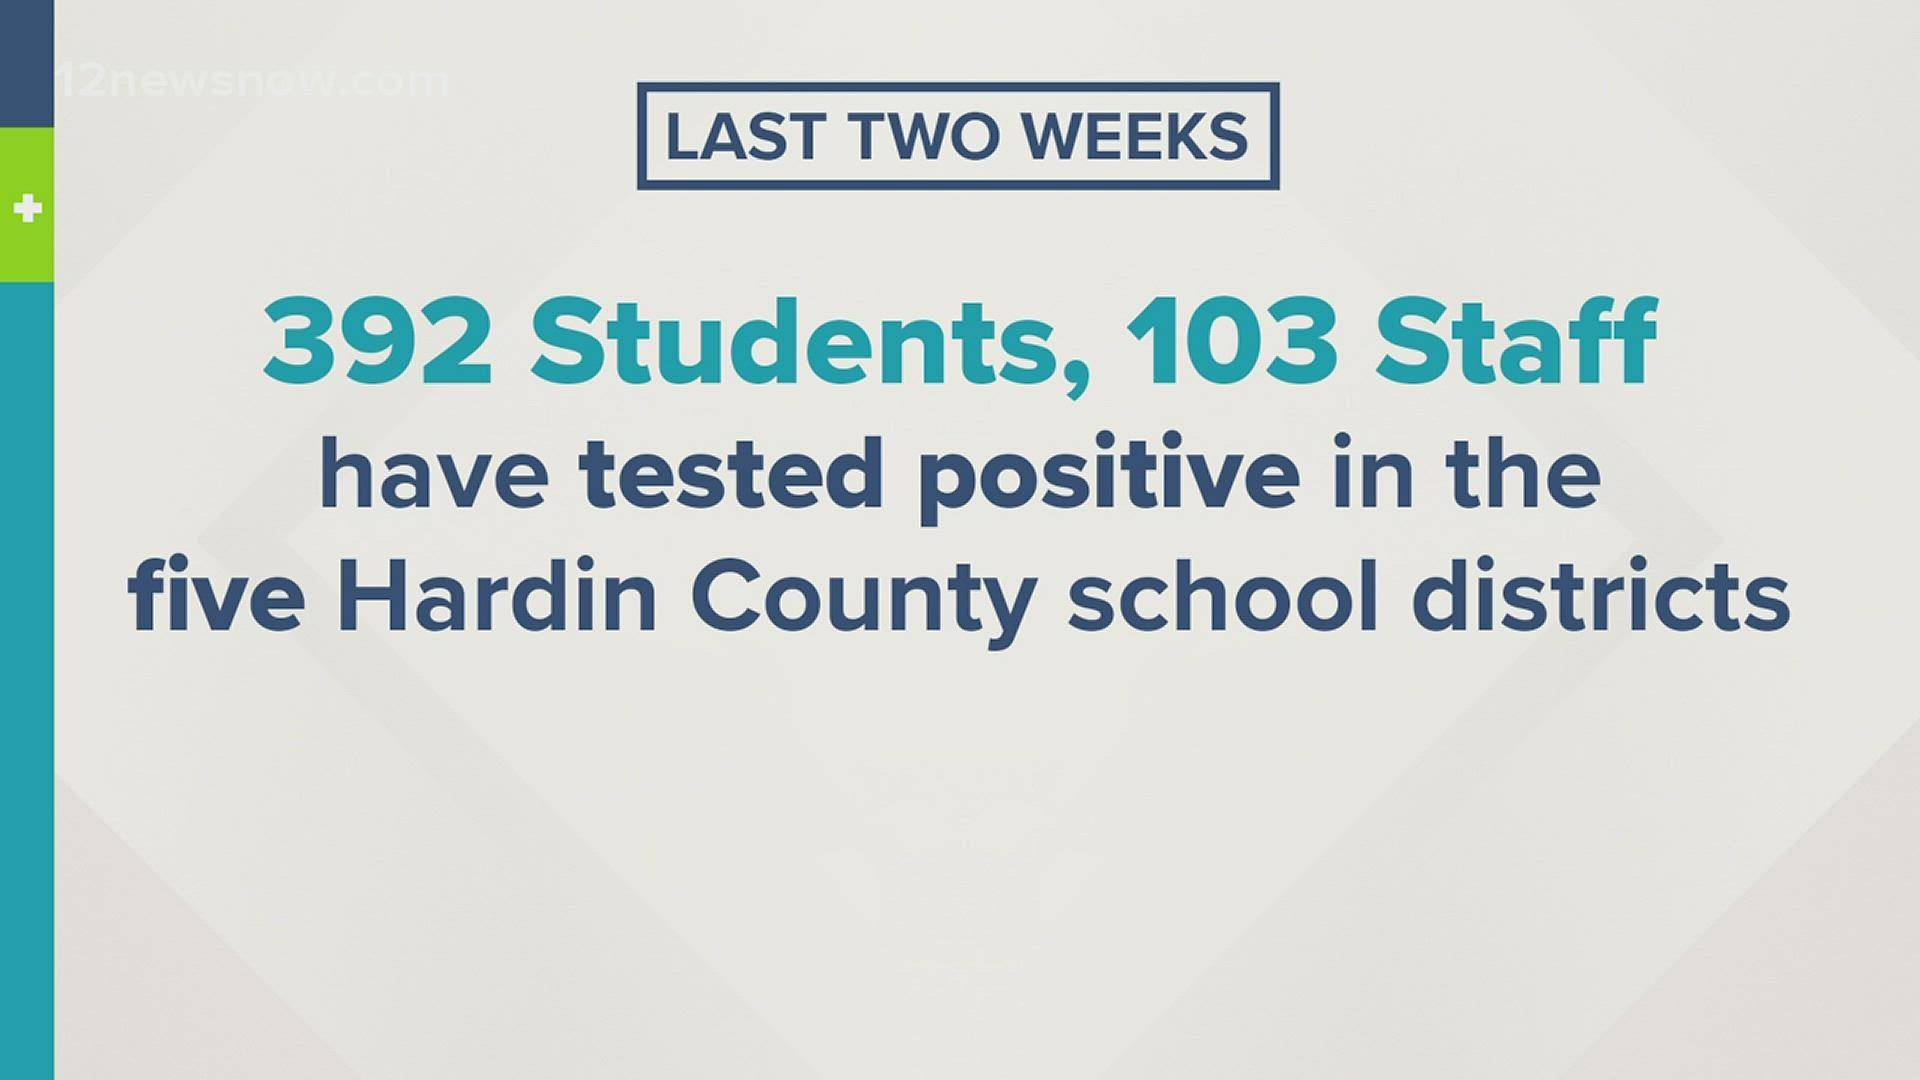 Hardin County Judge Wayne McDaniel sent an email to school districts in the county, saying many of the new coronavirus cases involve young people.